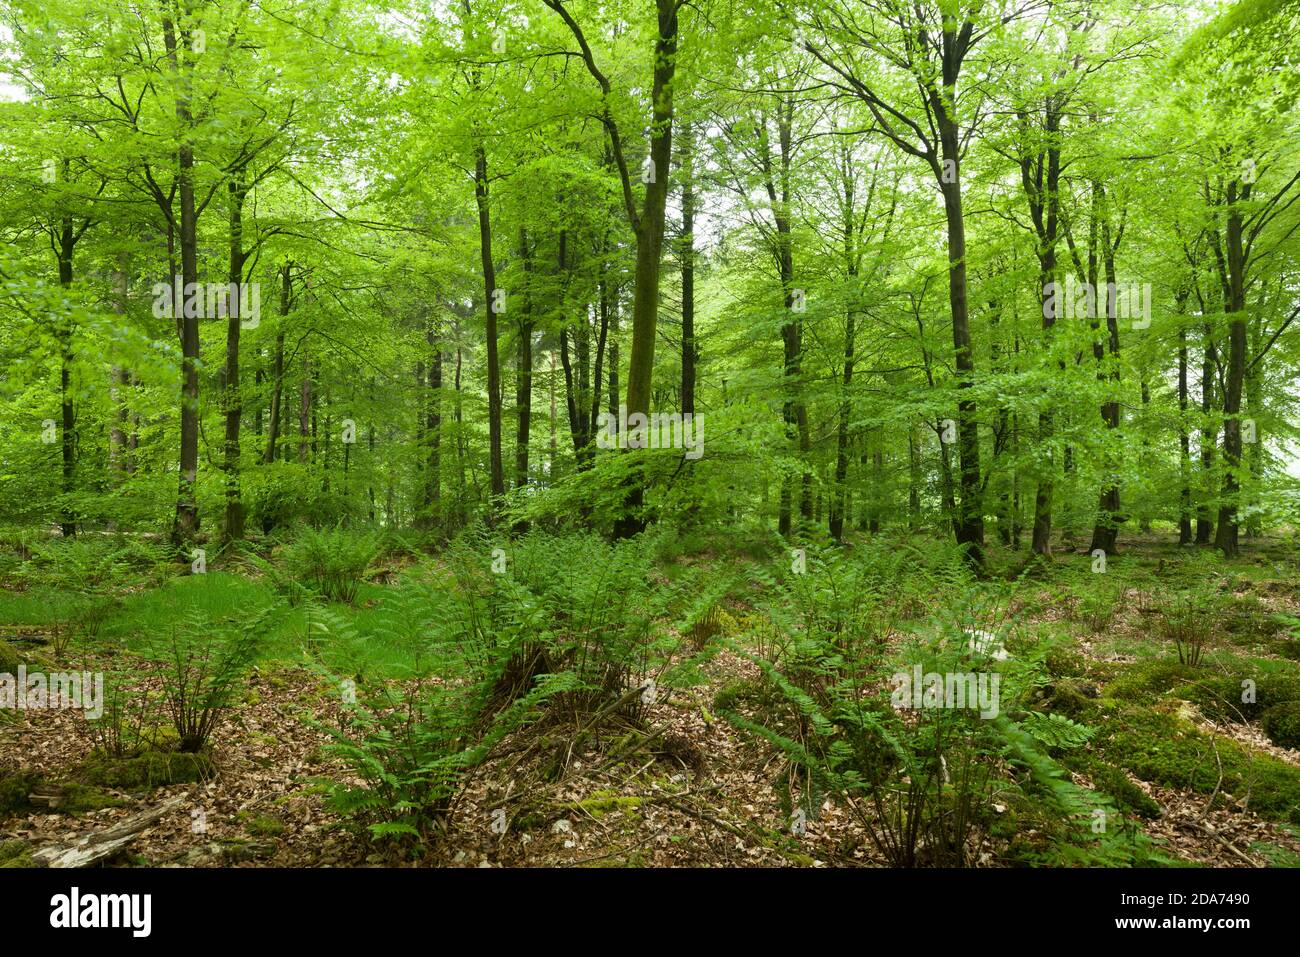 Broad Buckler Ferns (Dryopteris dilatata) in a beech woodland in spring at Stockhill Wood in the Mendip Hills, Somerset, England. Stock Photo